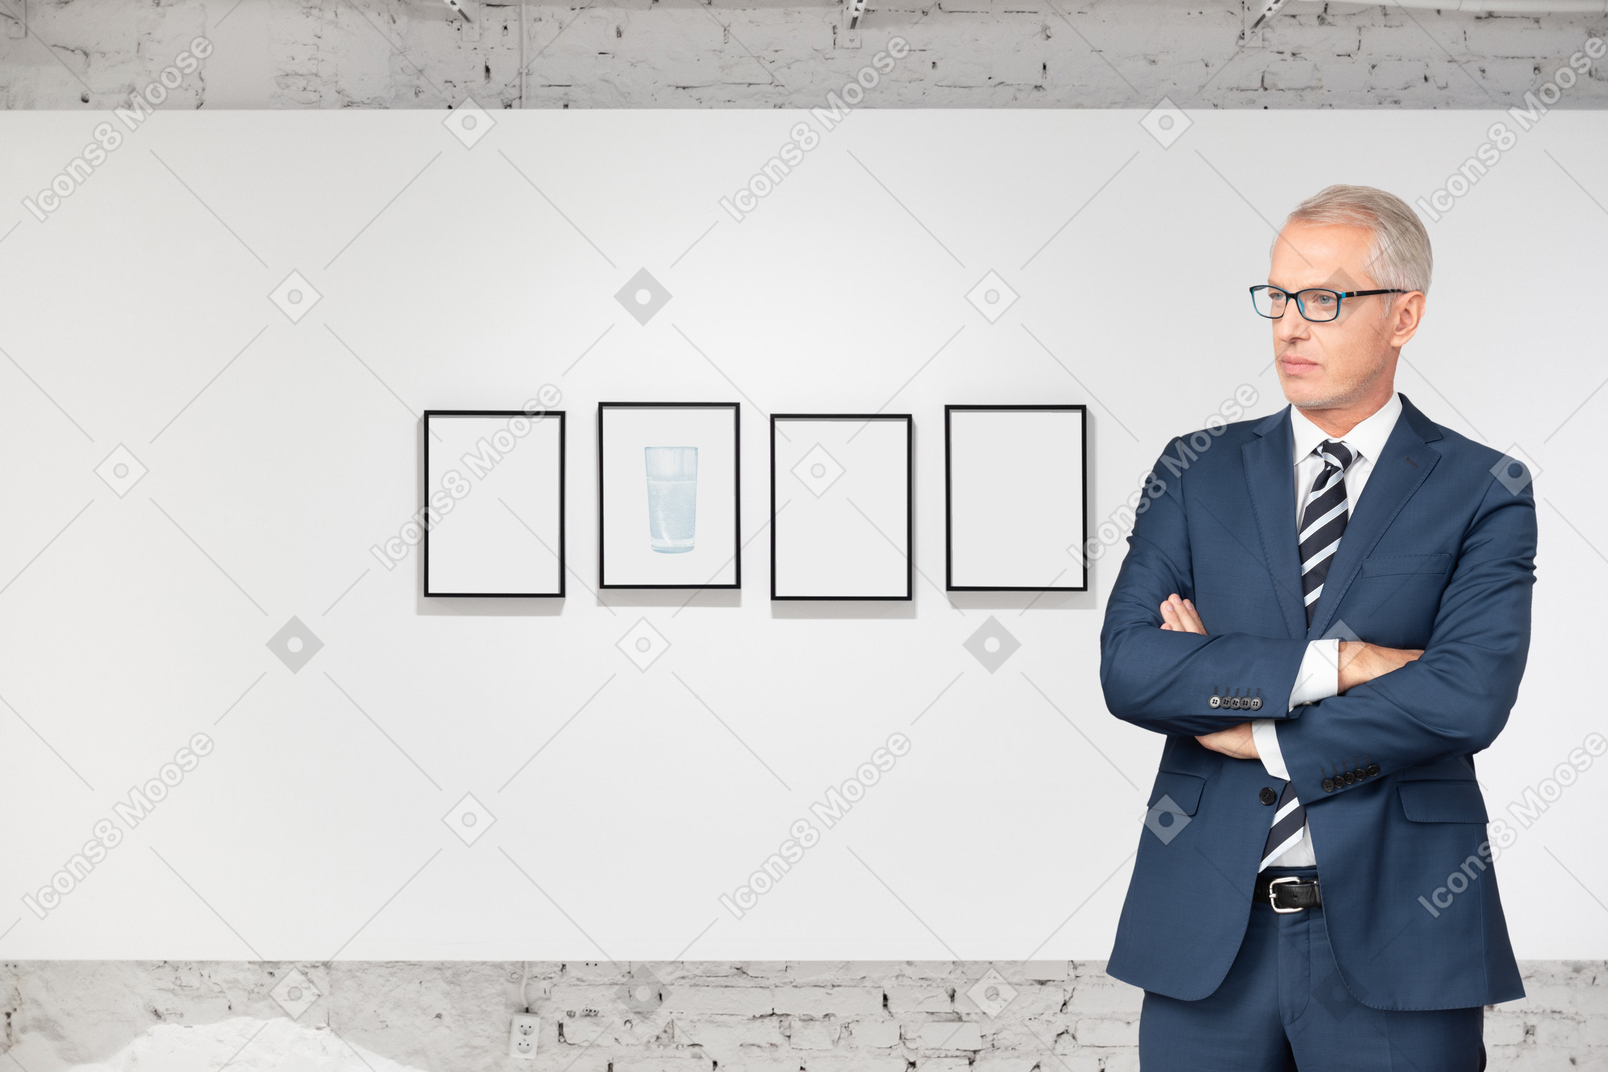 Businessman in suit visiting an art exhibition